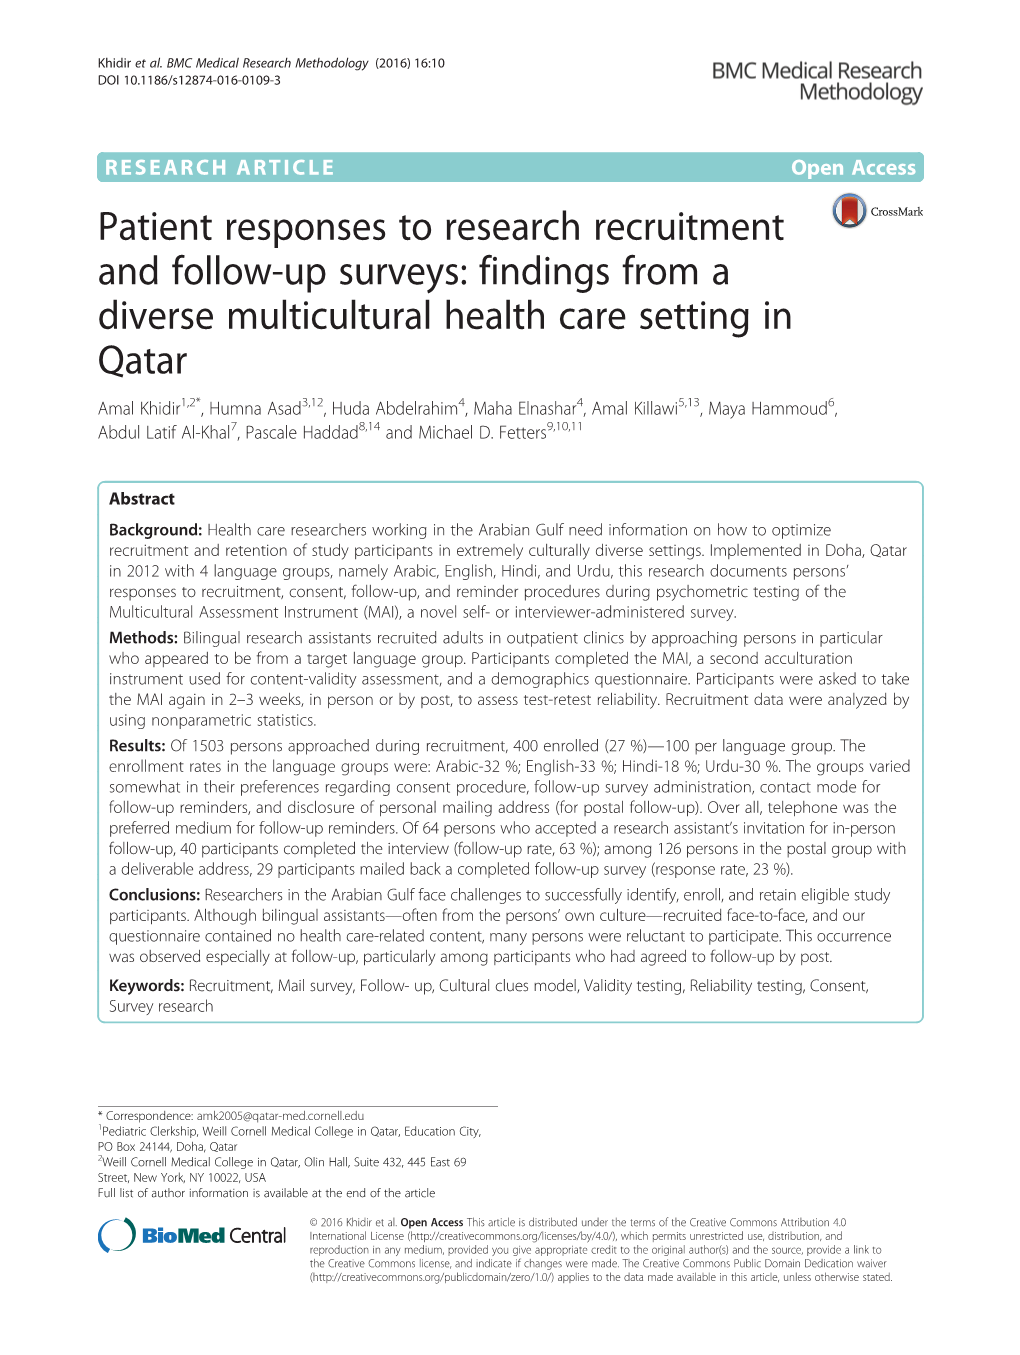 Patient Responses to Research Recruitment and Follow-Up Surveys